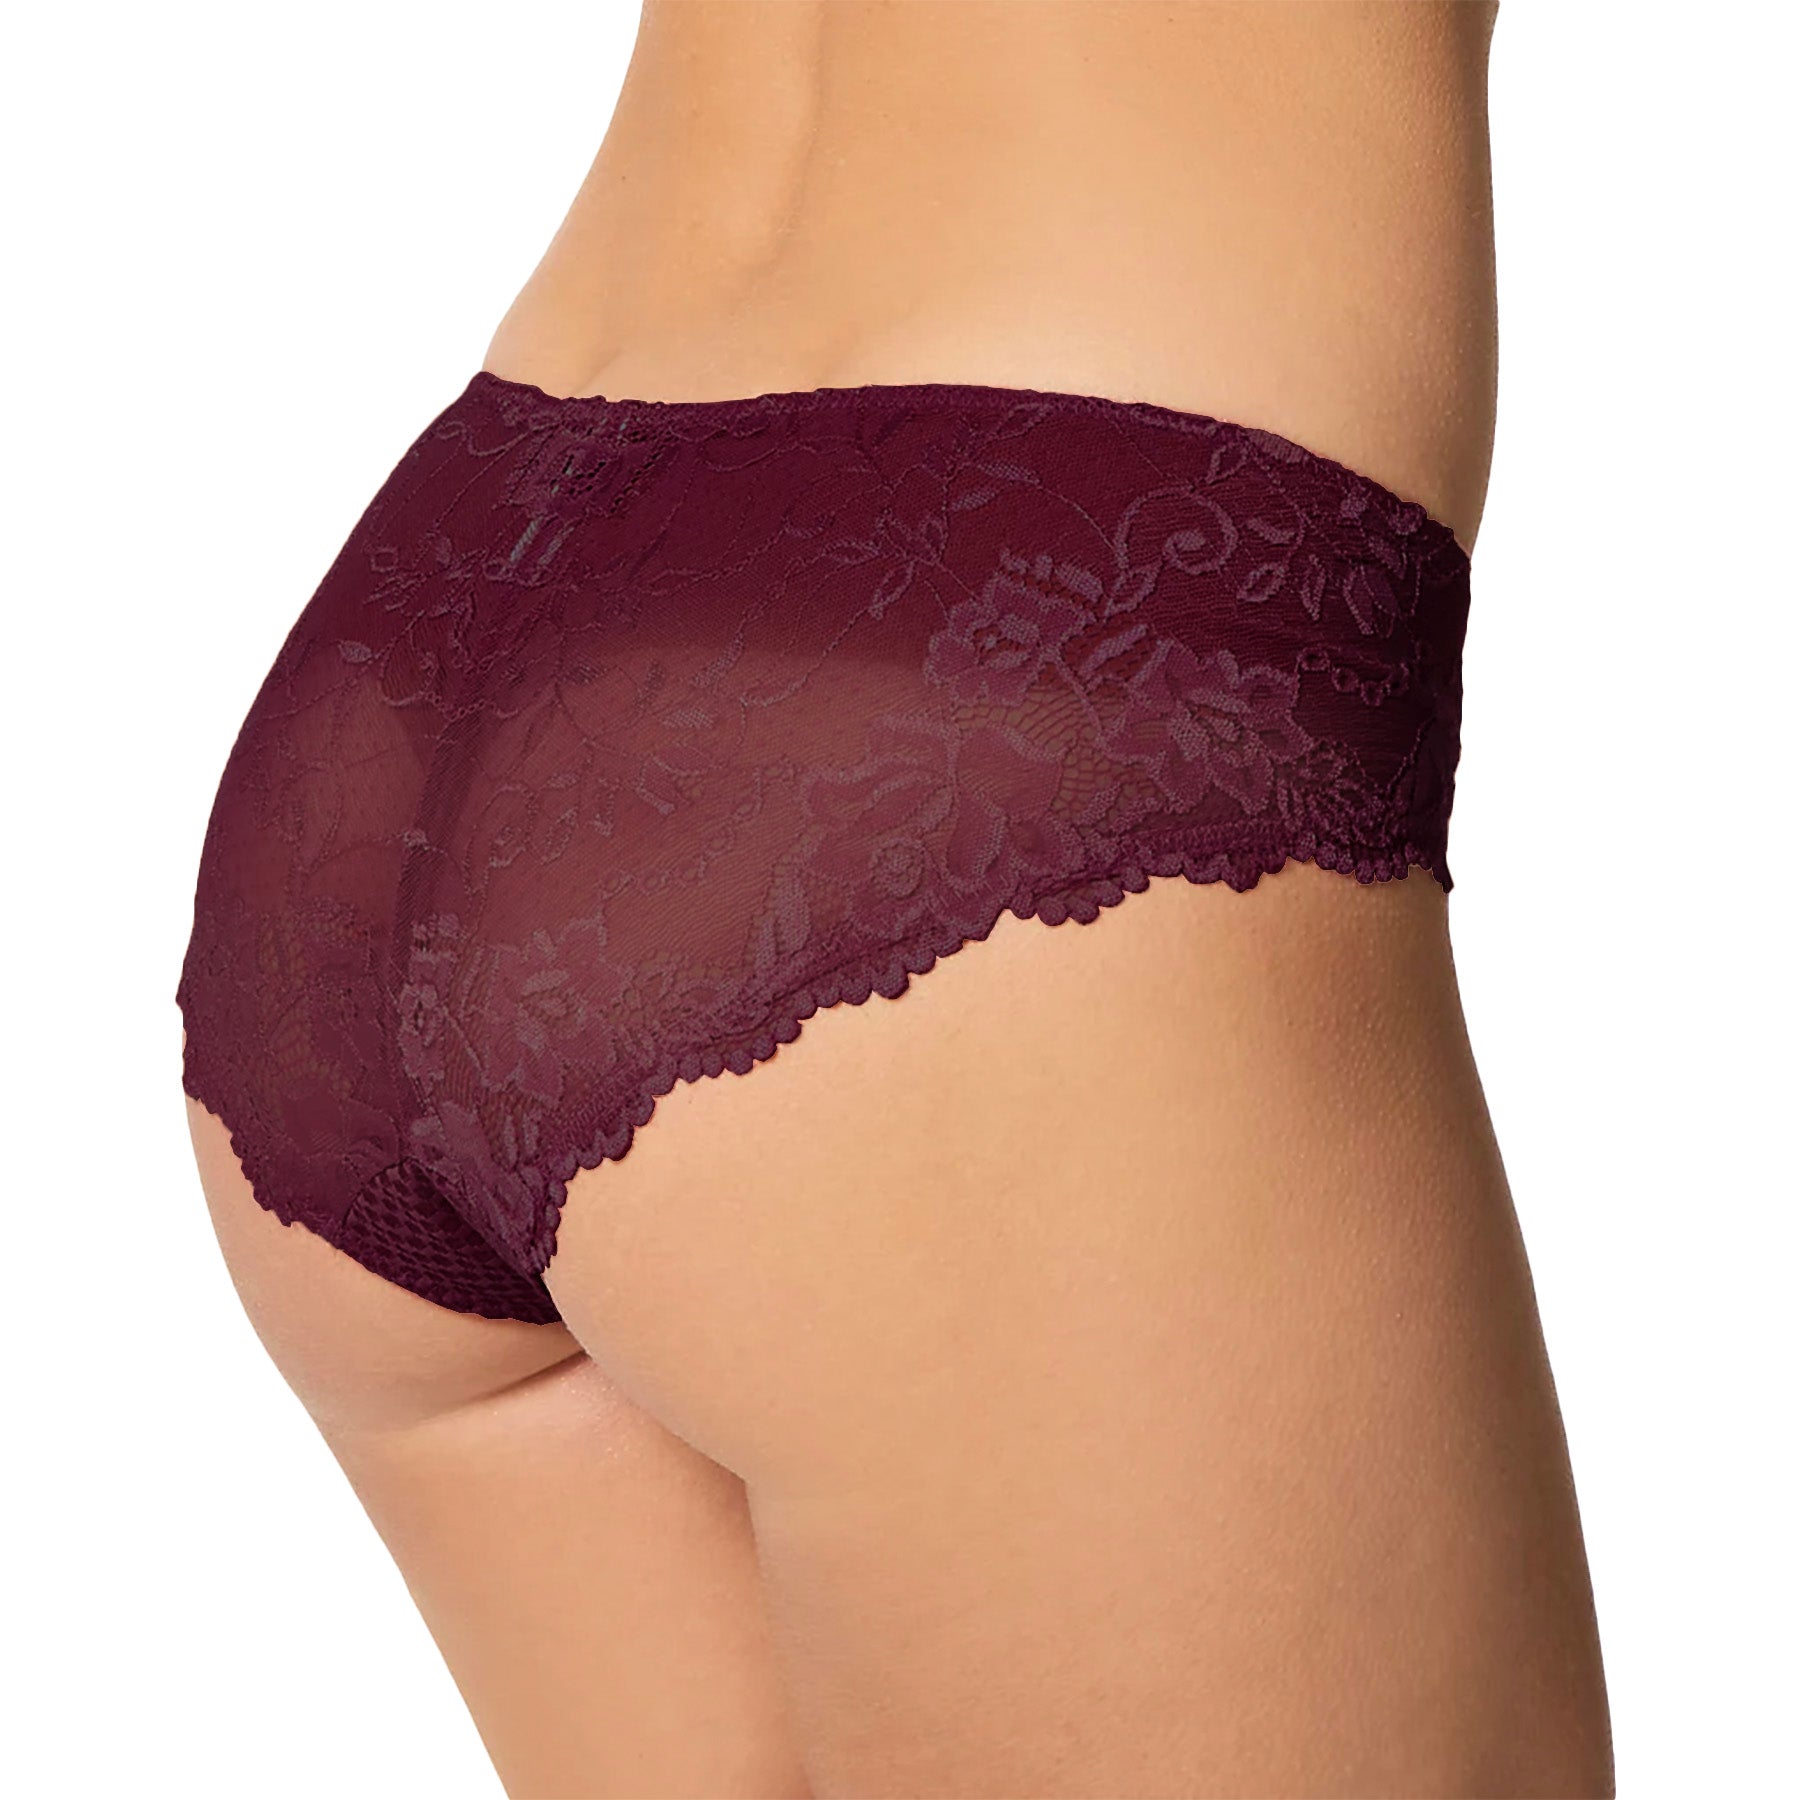 Fit FUly Yours Serena Bikini With Lace U2762 Burgundy Rear View